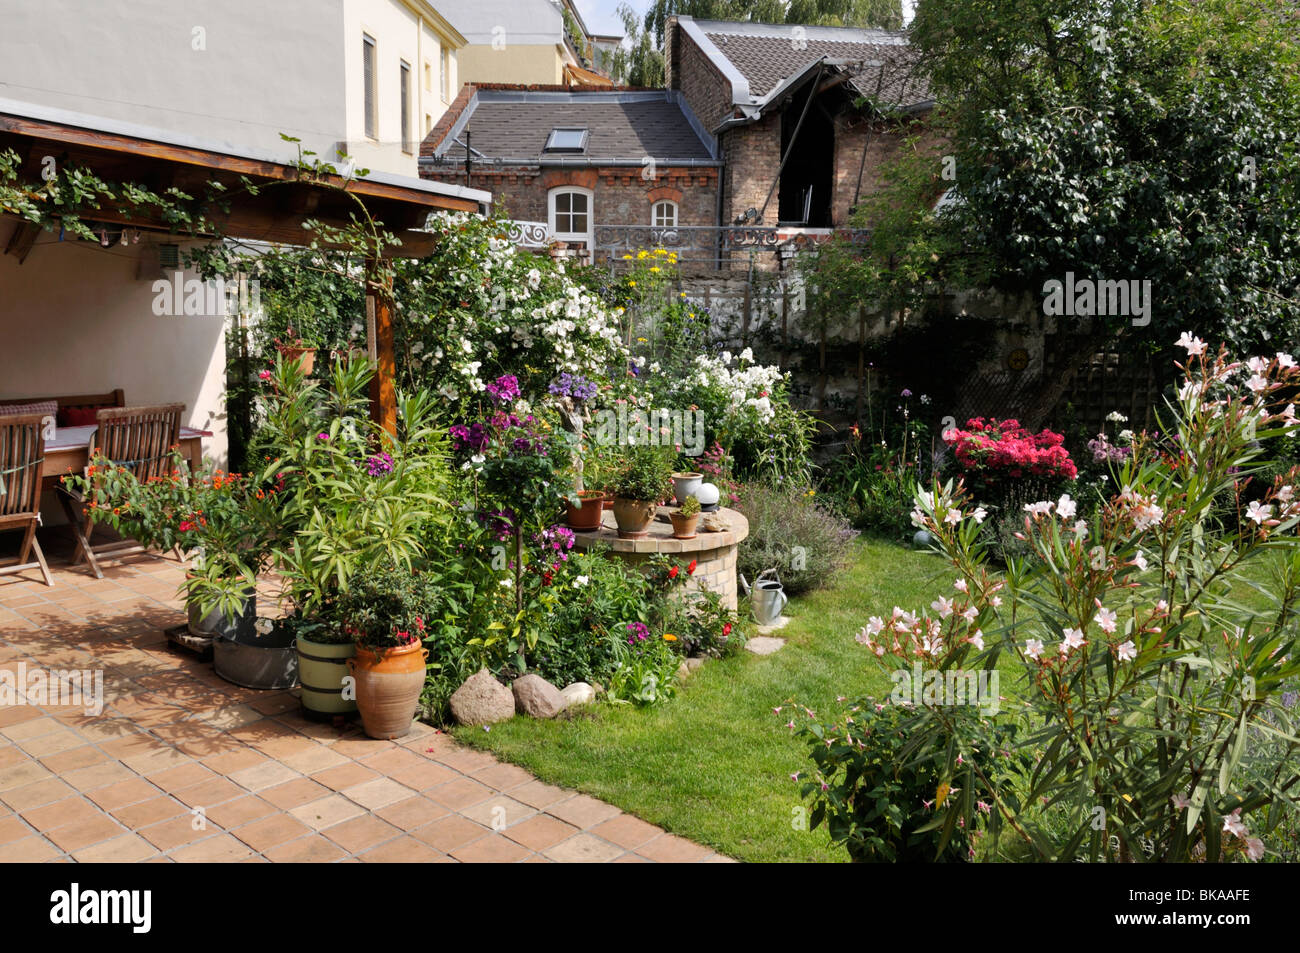 Backyard garden with perennial beds, lawn and terrace with potted plants. Design: Jutta Wahren Stock Photo